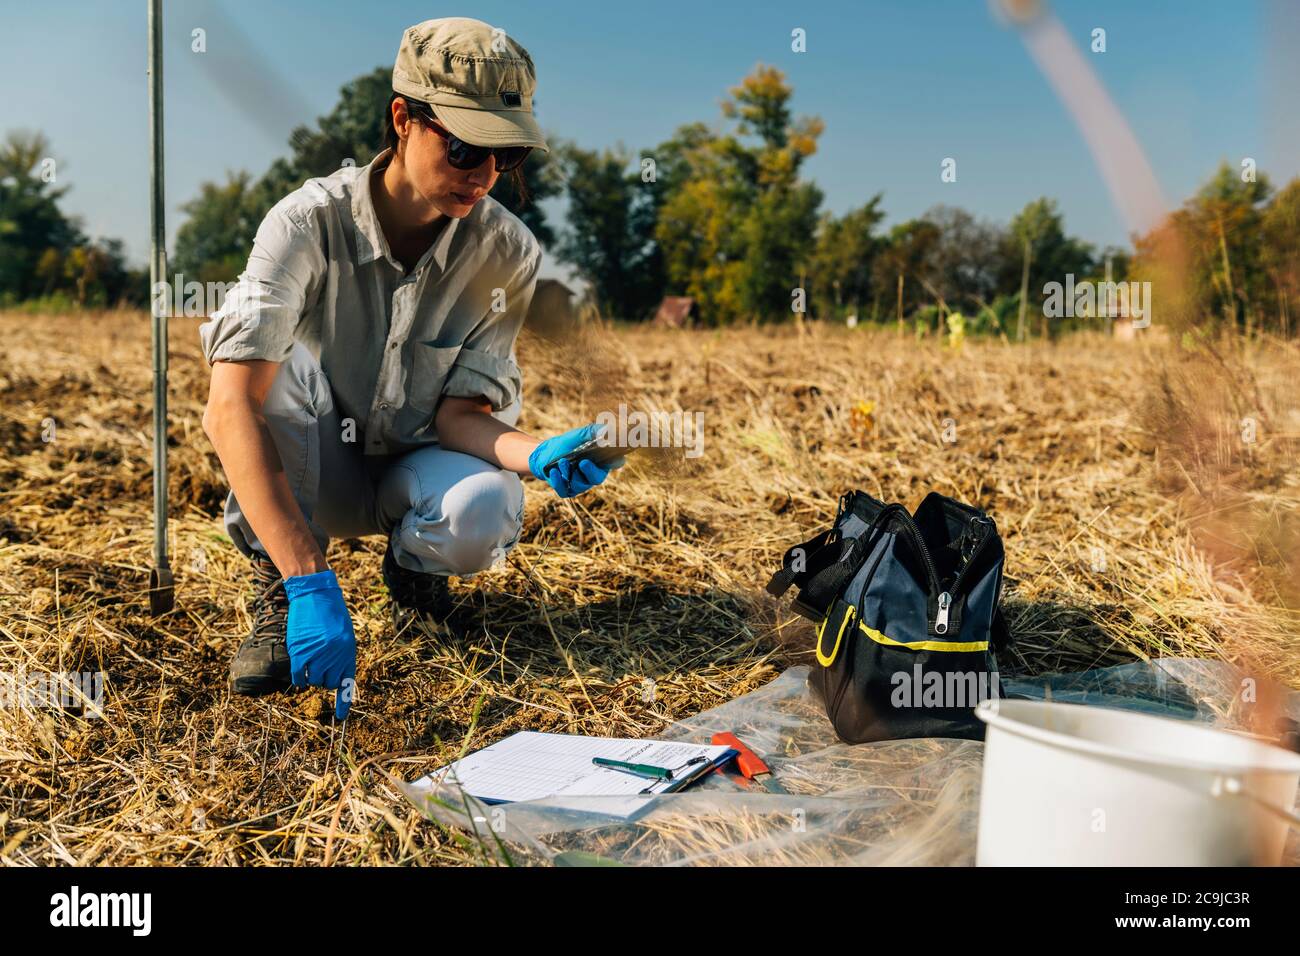 Measuring Soil Temperature with Thermometer. Female agronomist measuring soil temperature in the field Stock Photo